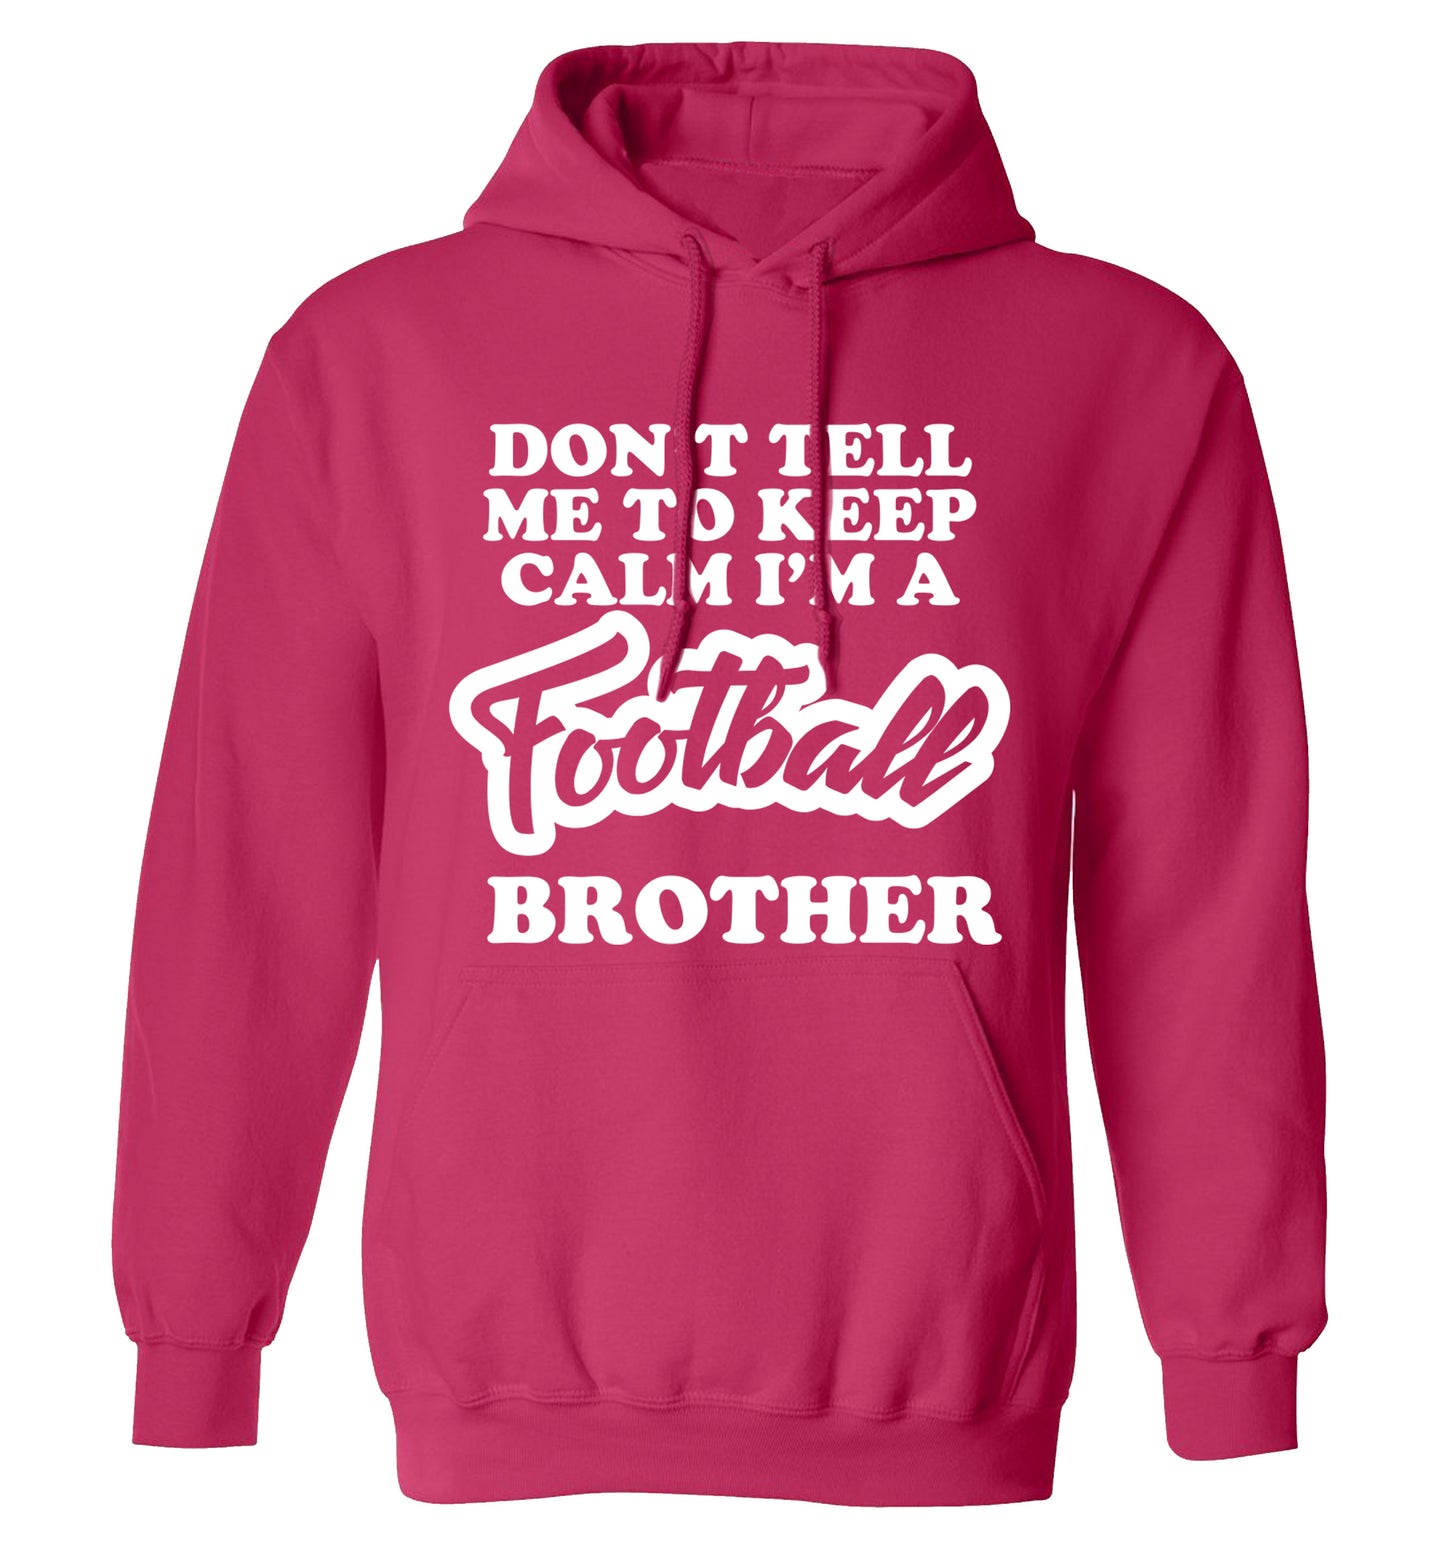 Don't tell me to keep calm I'm a football brother adults unisexpink hoodie 2XL